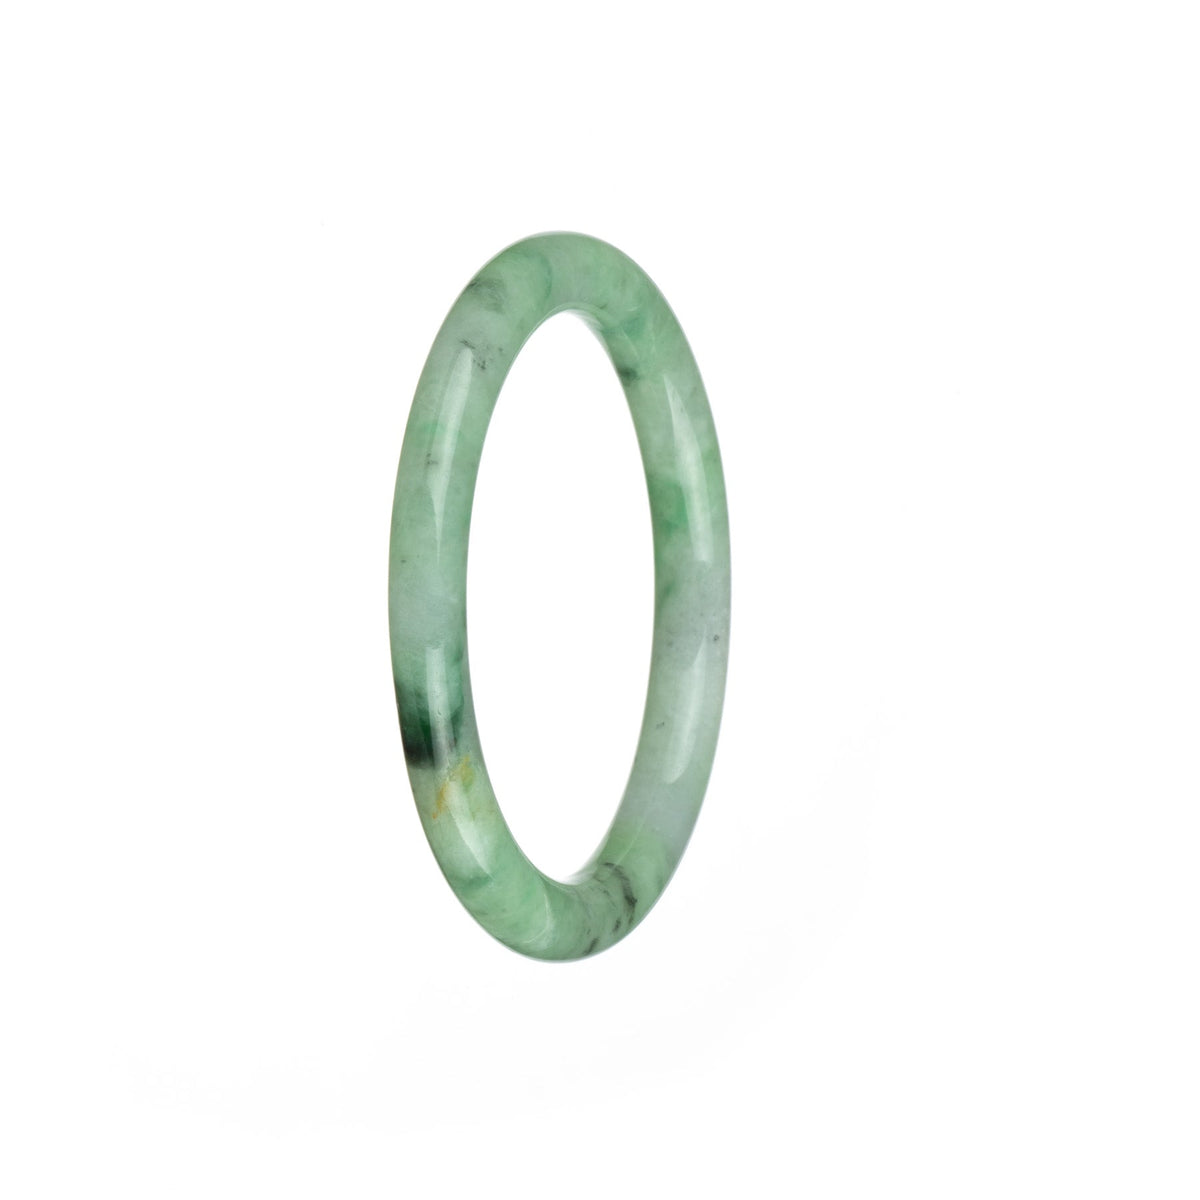 Genuine Natural Green with Light Green Spots Jade Bracelet - 53mm Petite Round